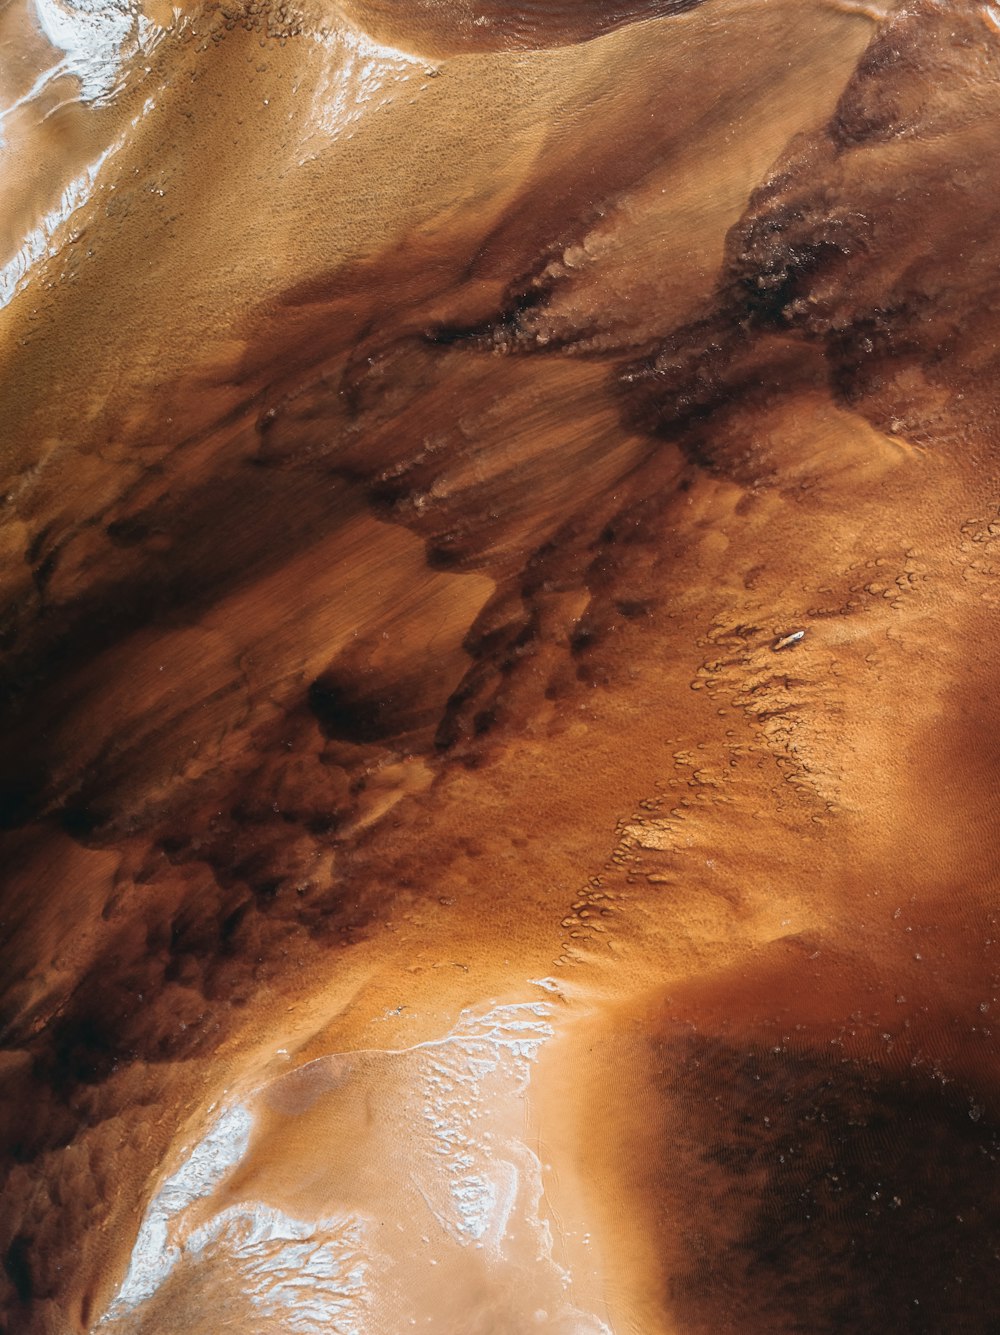 a close up of a brown substance on a surface